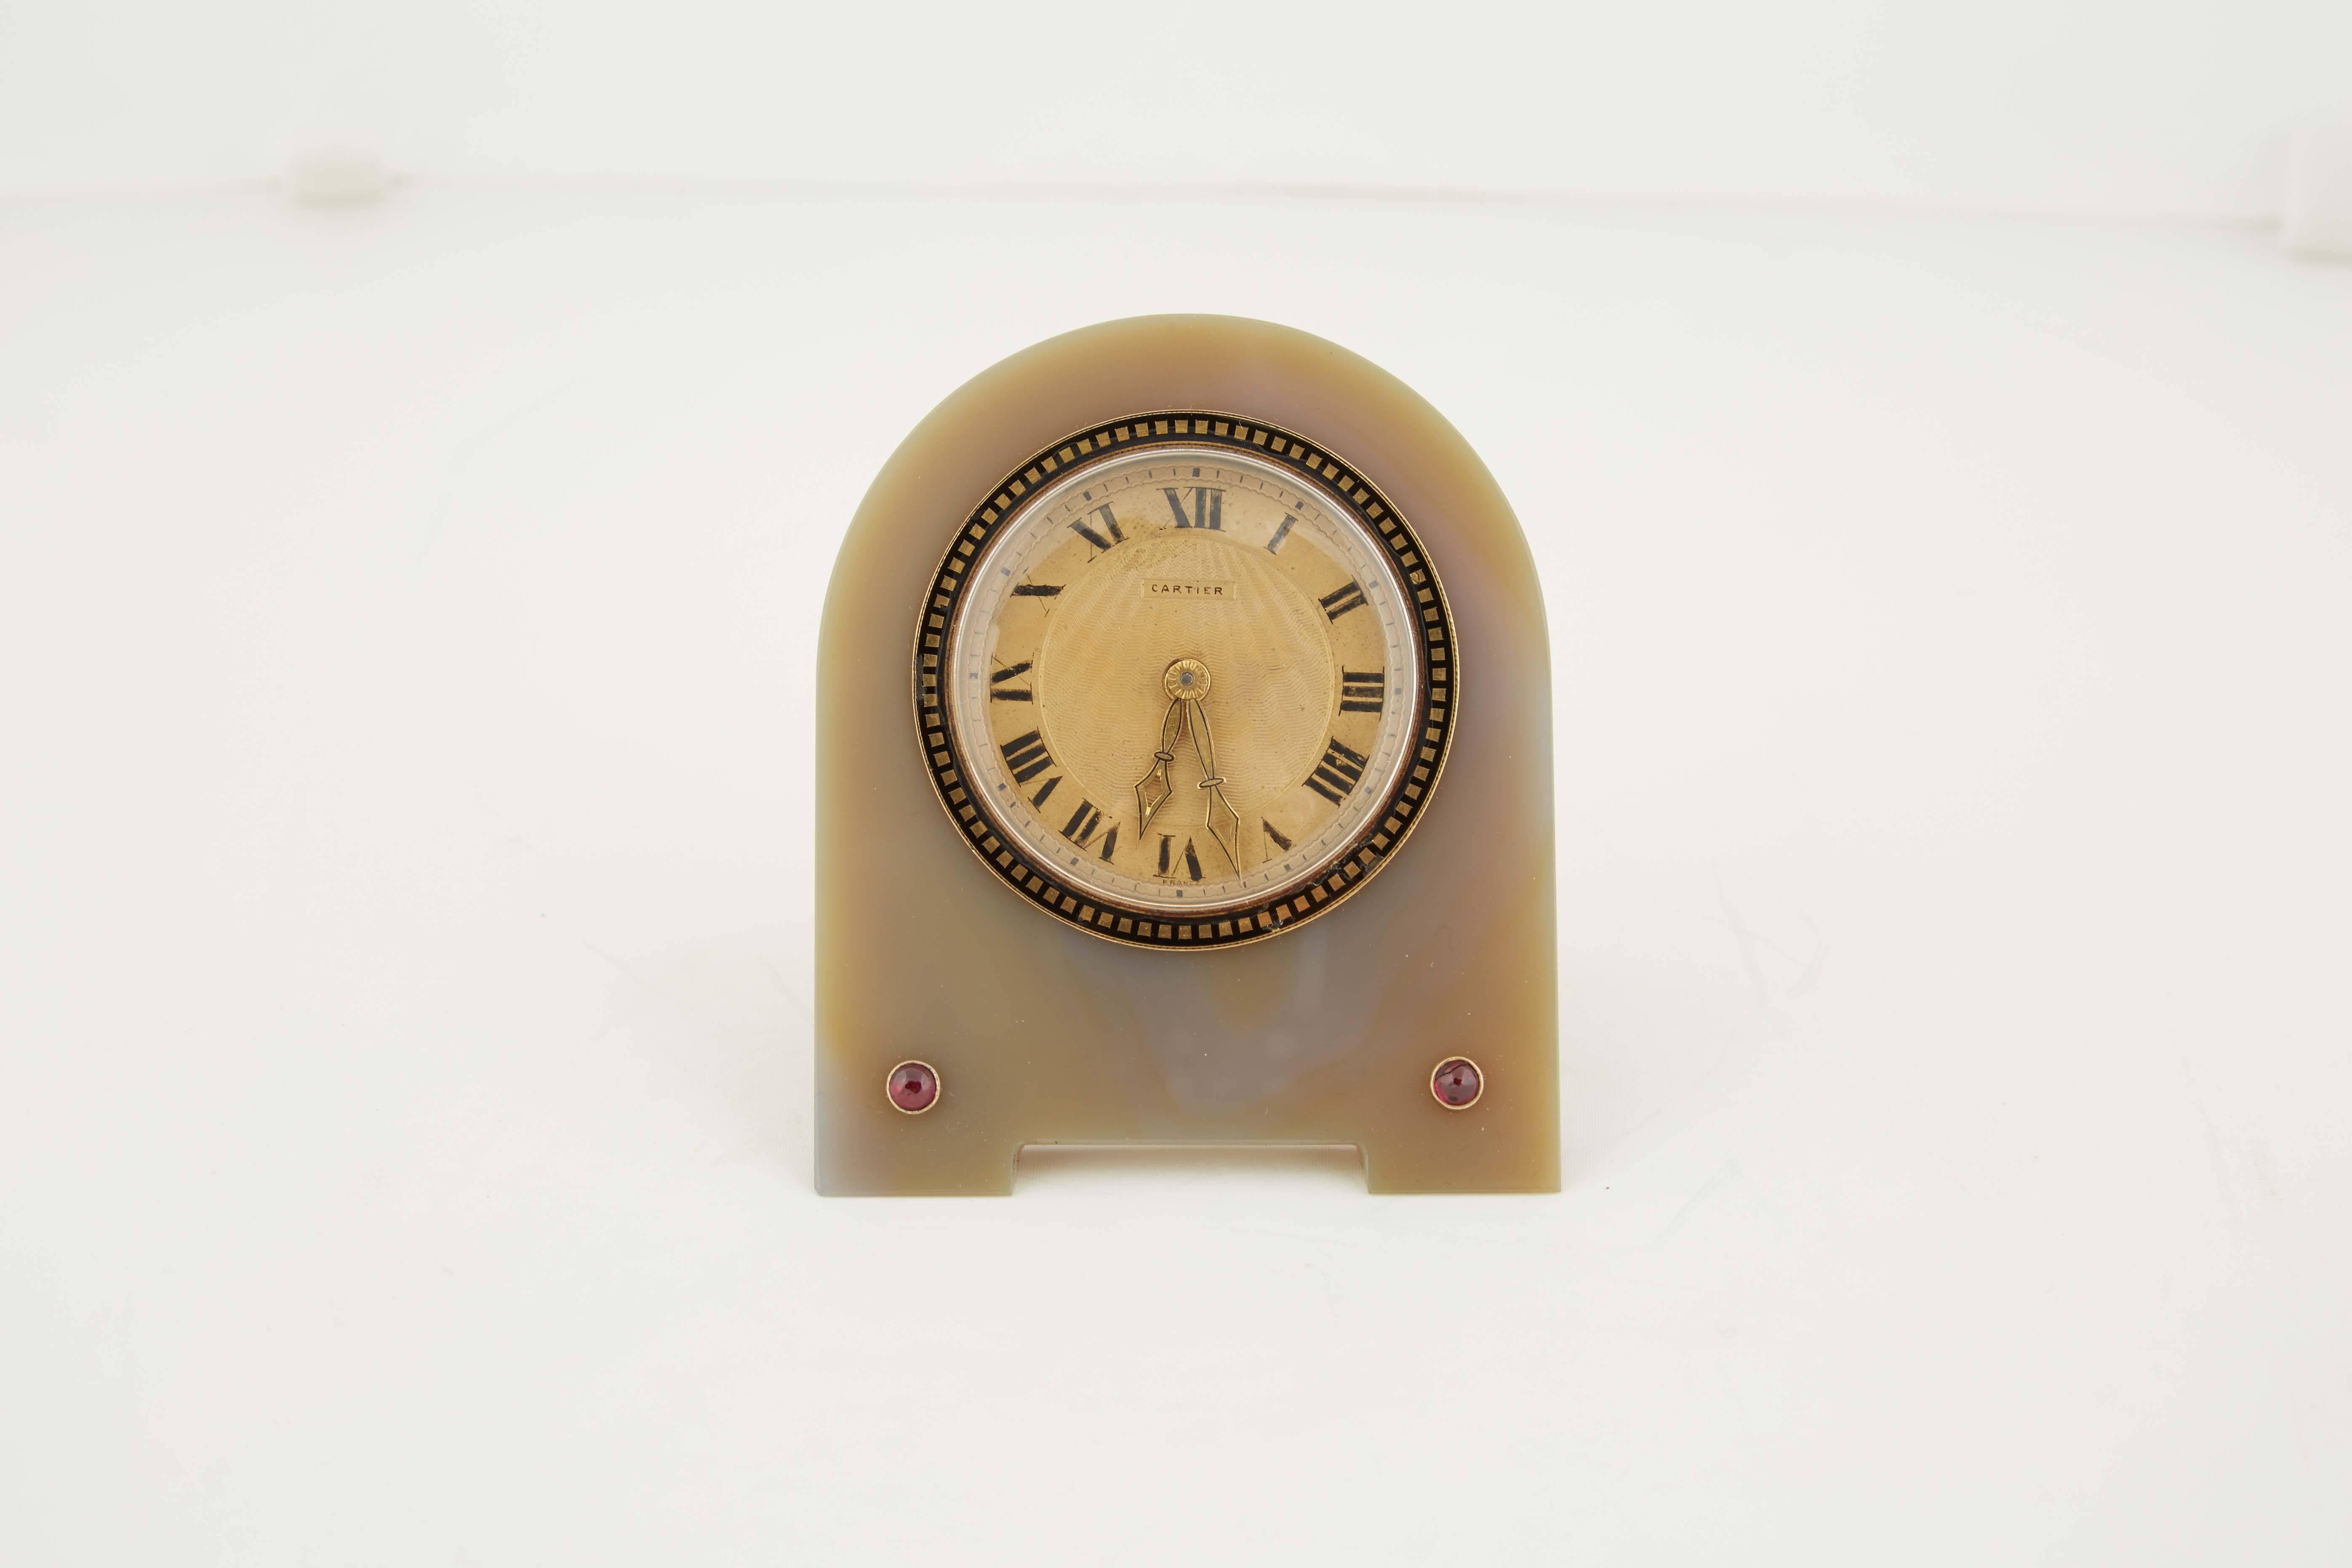 A very fine Cartier Art Deco enamel agate desk clock with rubies, movement by European Watch & Clock Co.

Numbered 1913 on the back of the easel.

Please ask for more photos if needed.